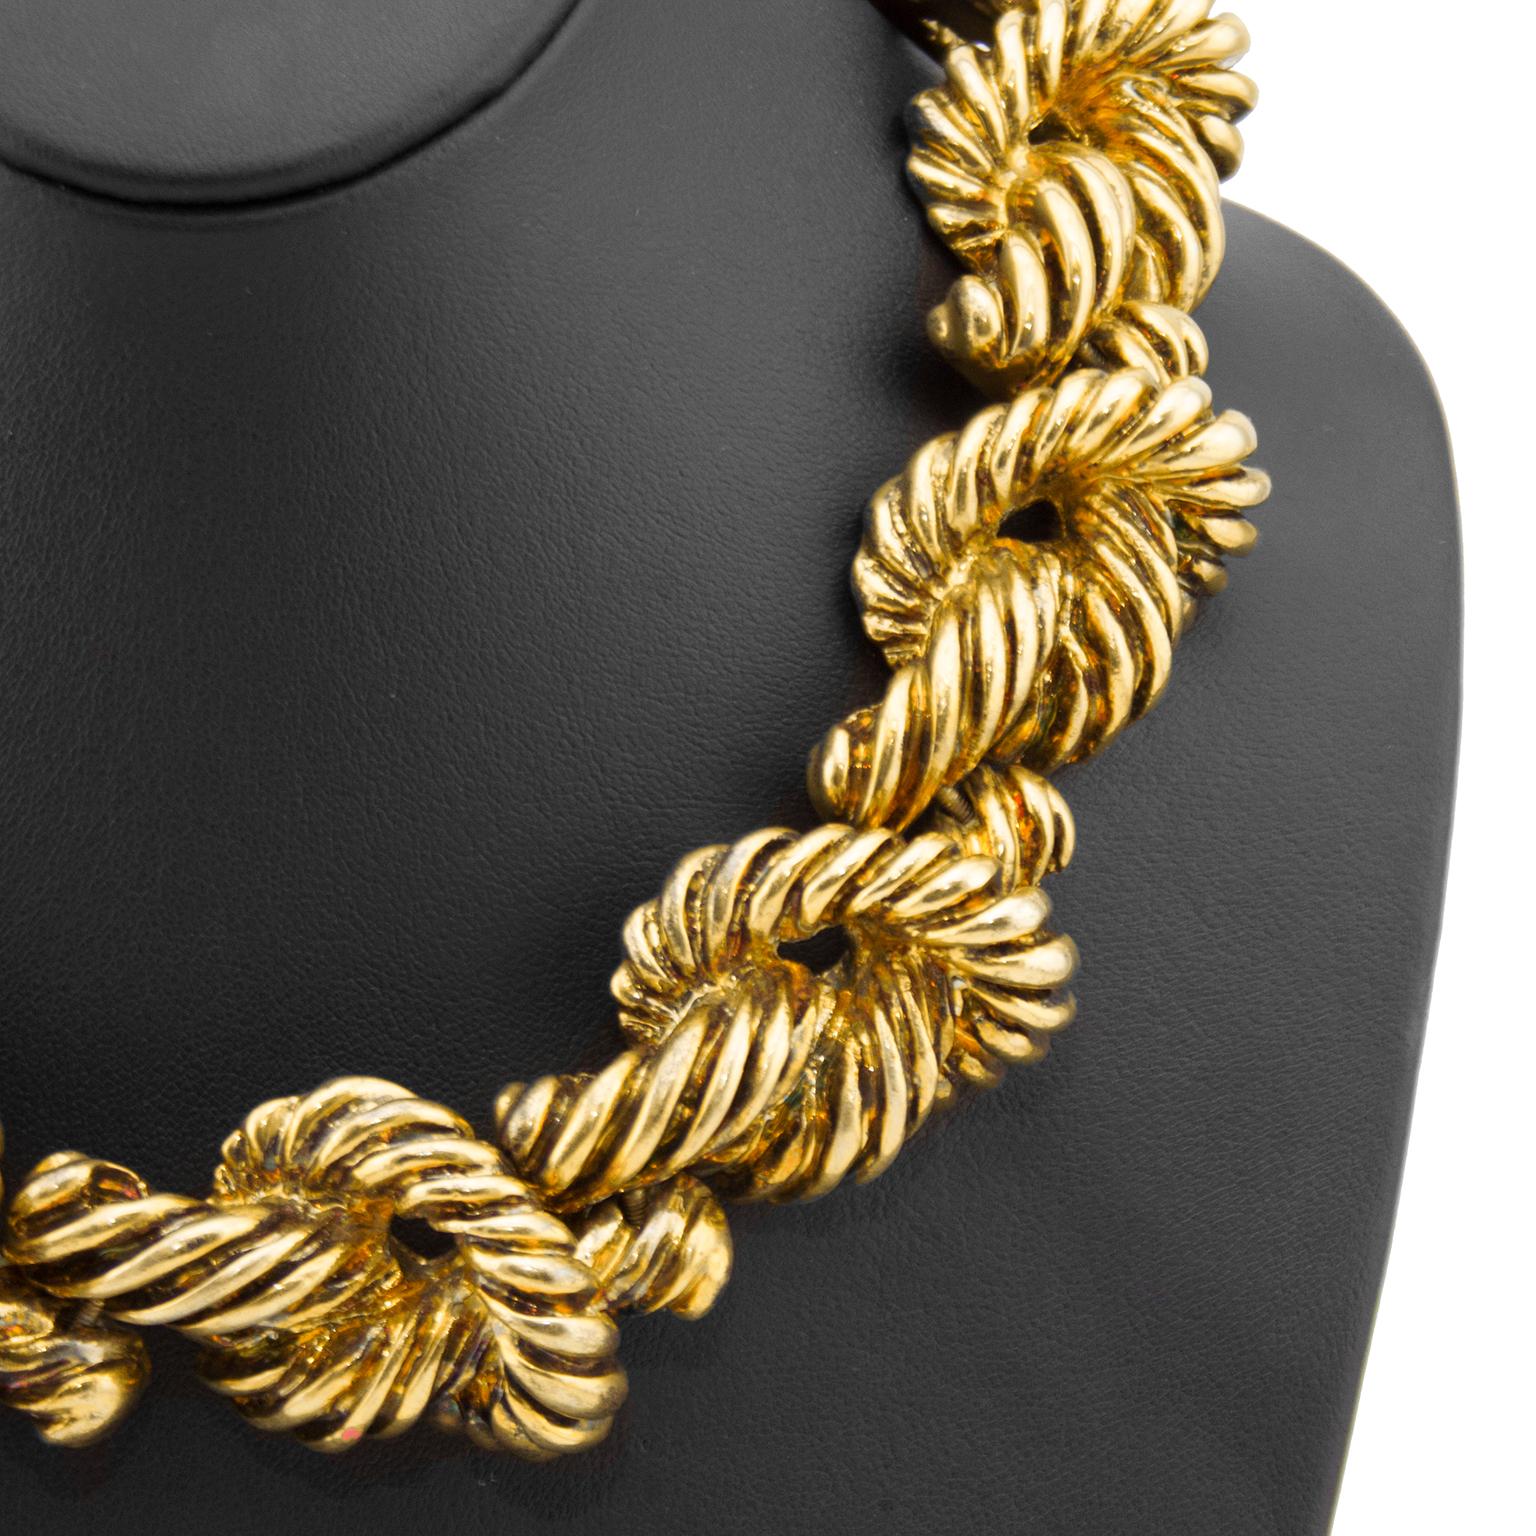 Chunky statement necklace by Christian LaCroix from the 1980s. Worn choker style, the goldtone links resemble large knots and are connected with screws that allow them to move and bend. The knots are flat on the underside and the necklace fastens at